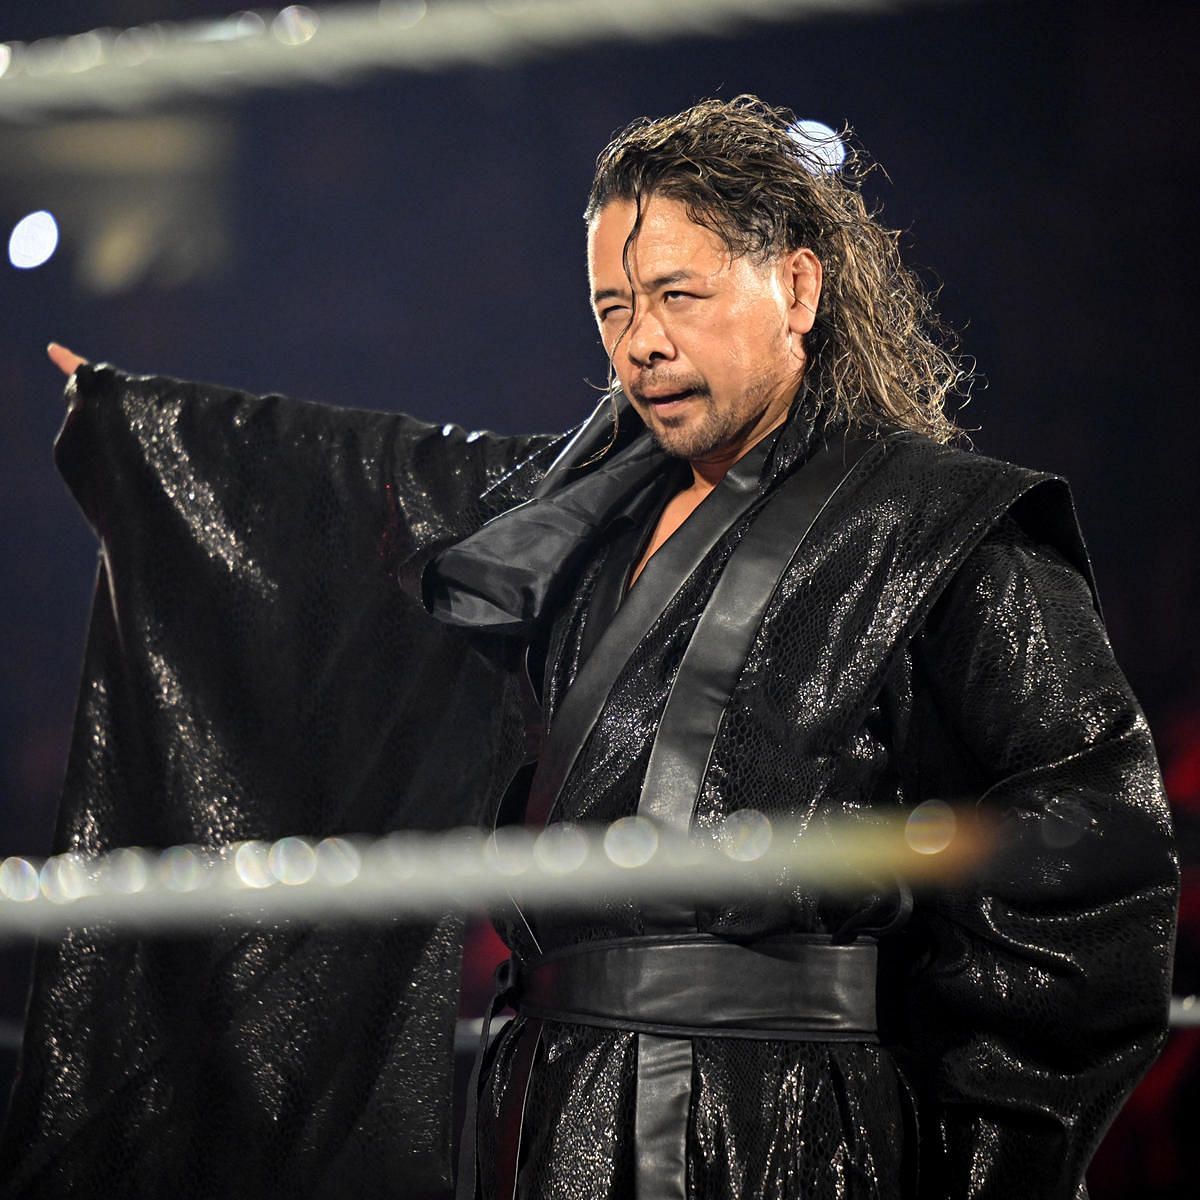 Nakamura could come to the rescue if needed